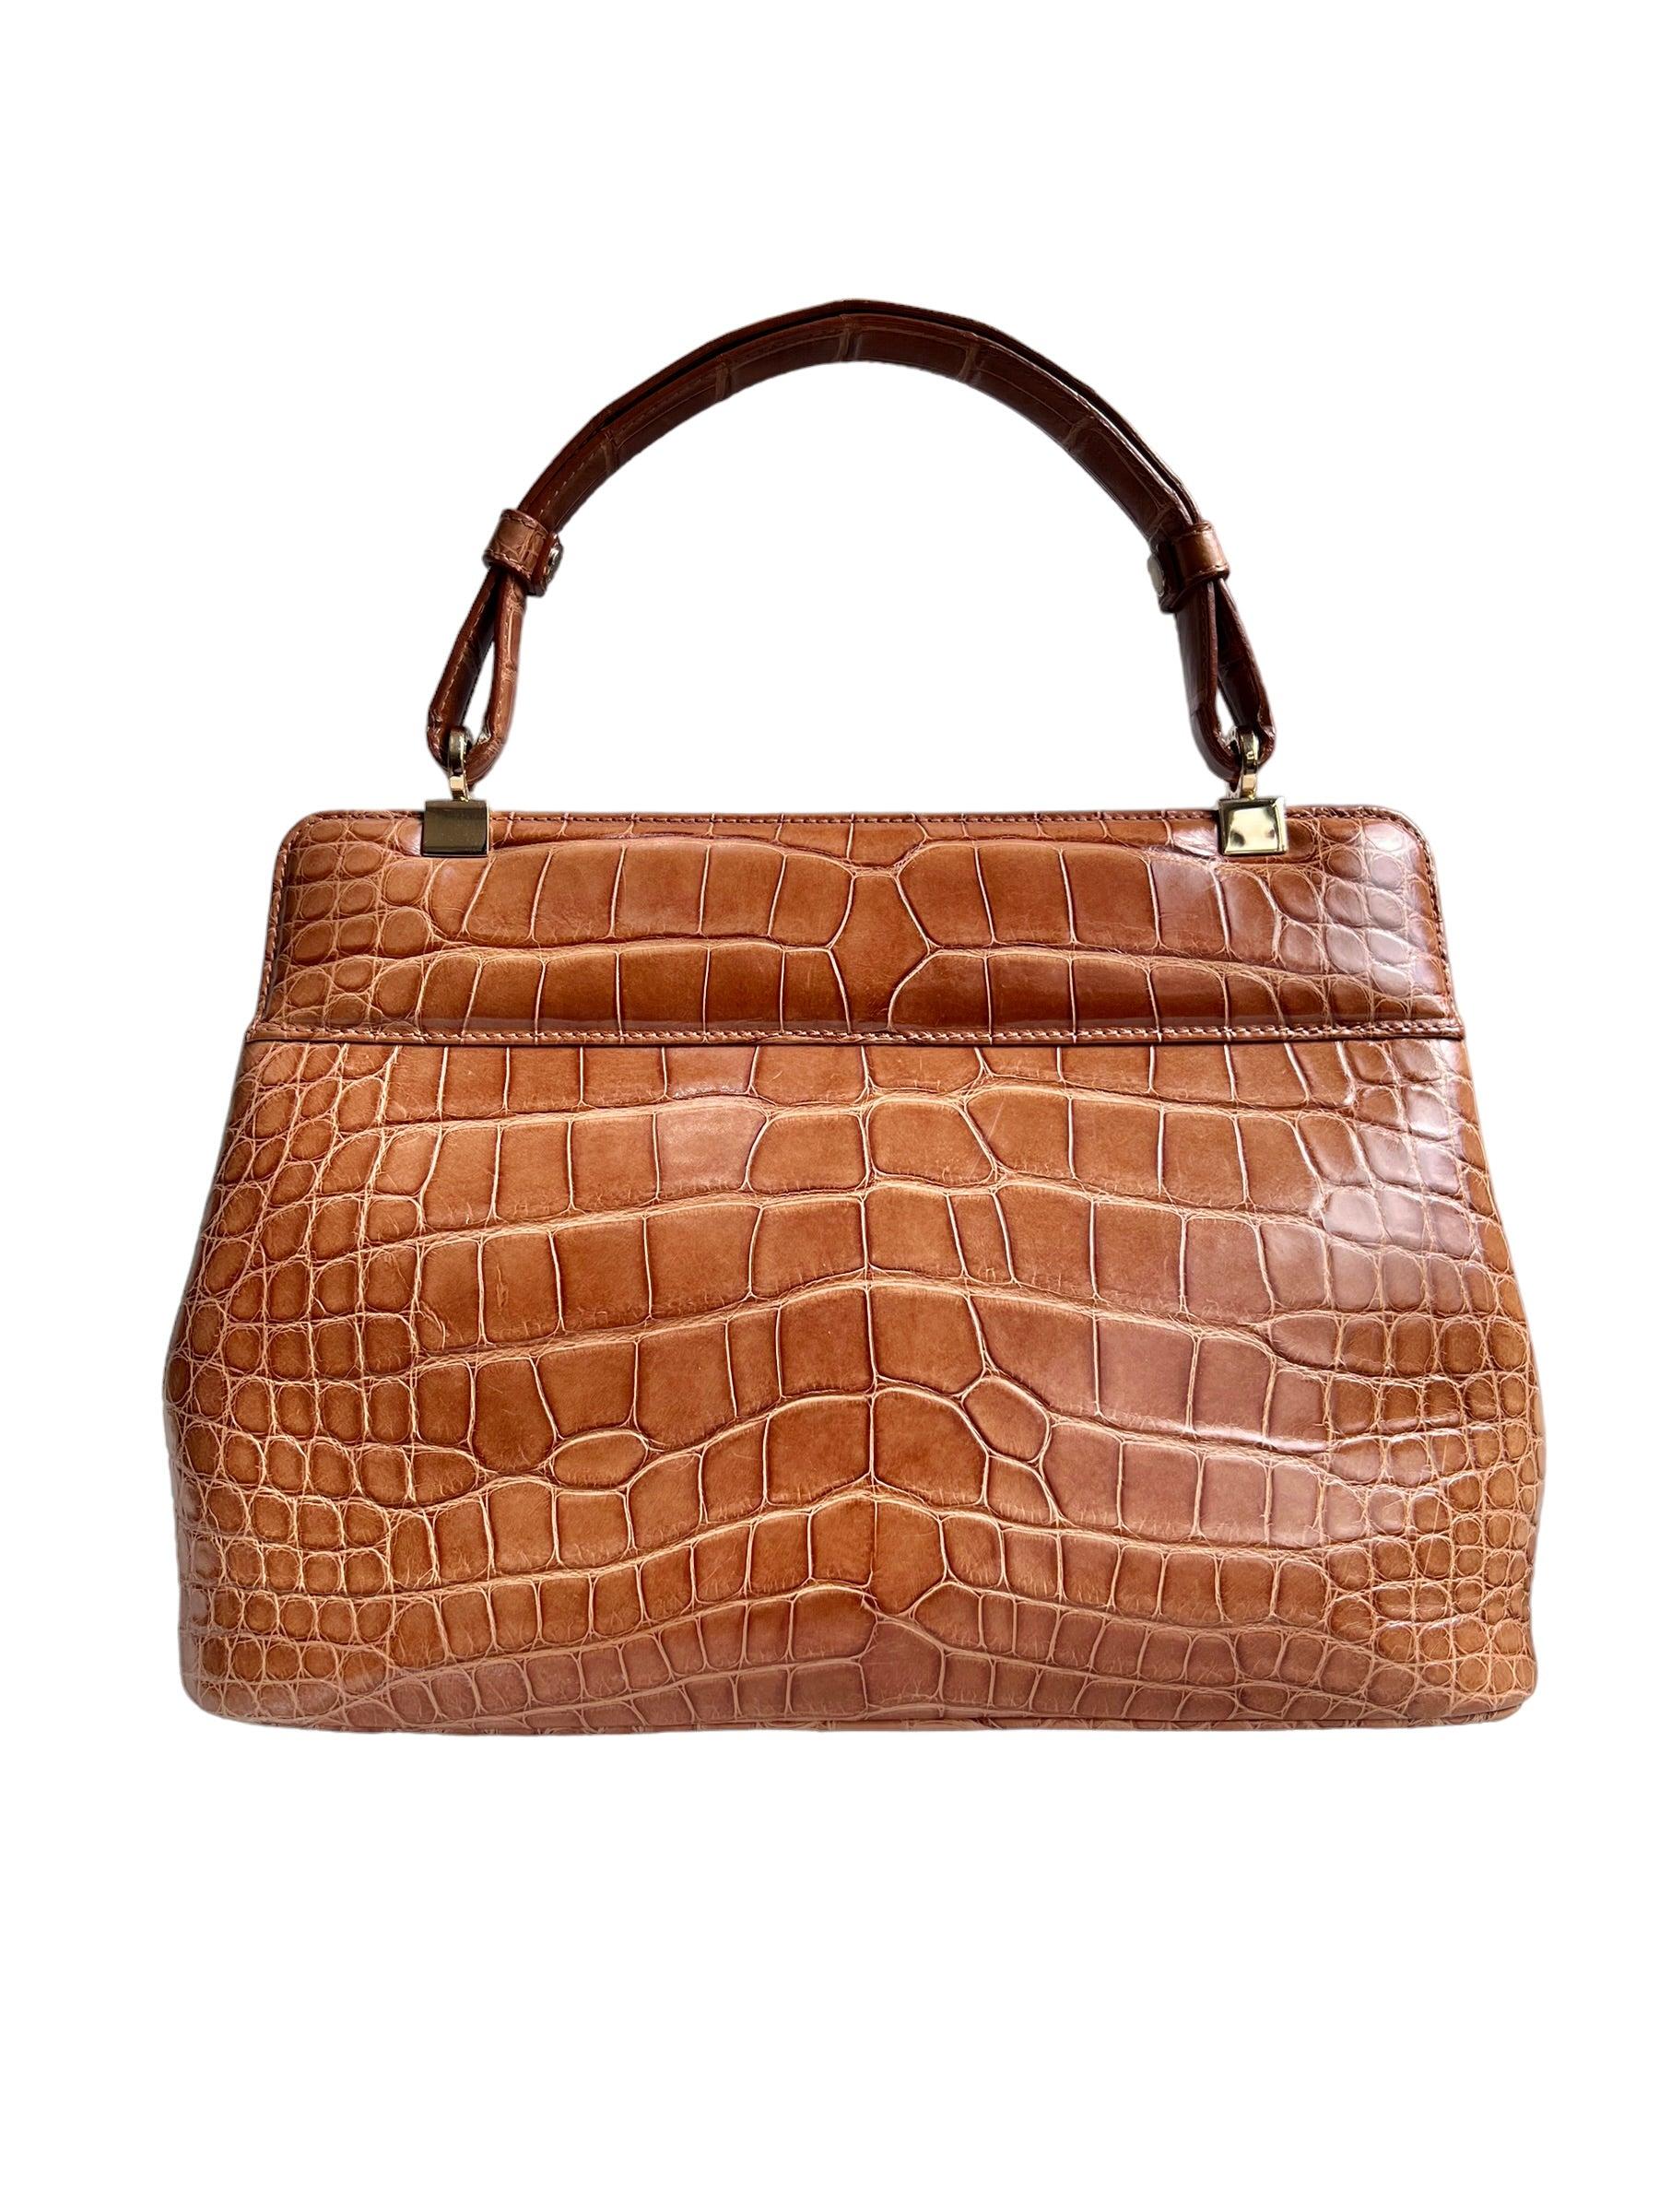 Bvlgari Exotic Leather Isabella Rossellini Top Handle Bag In Excellent Condition For Sale In London, GB